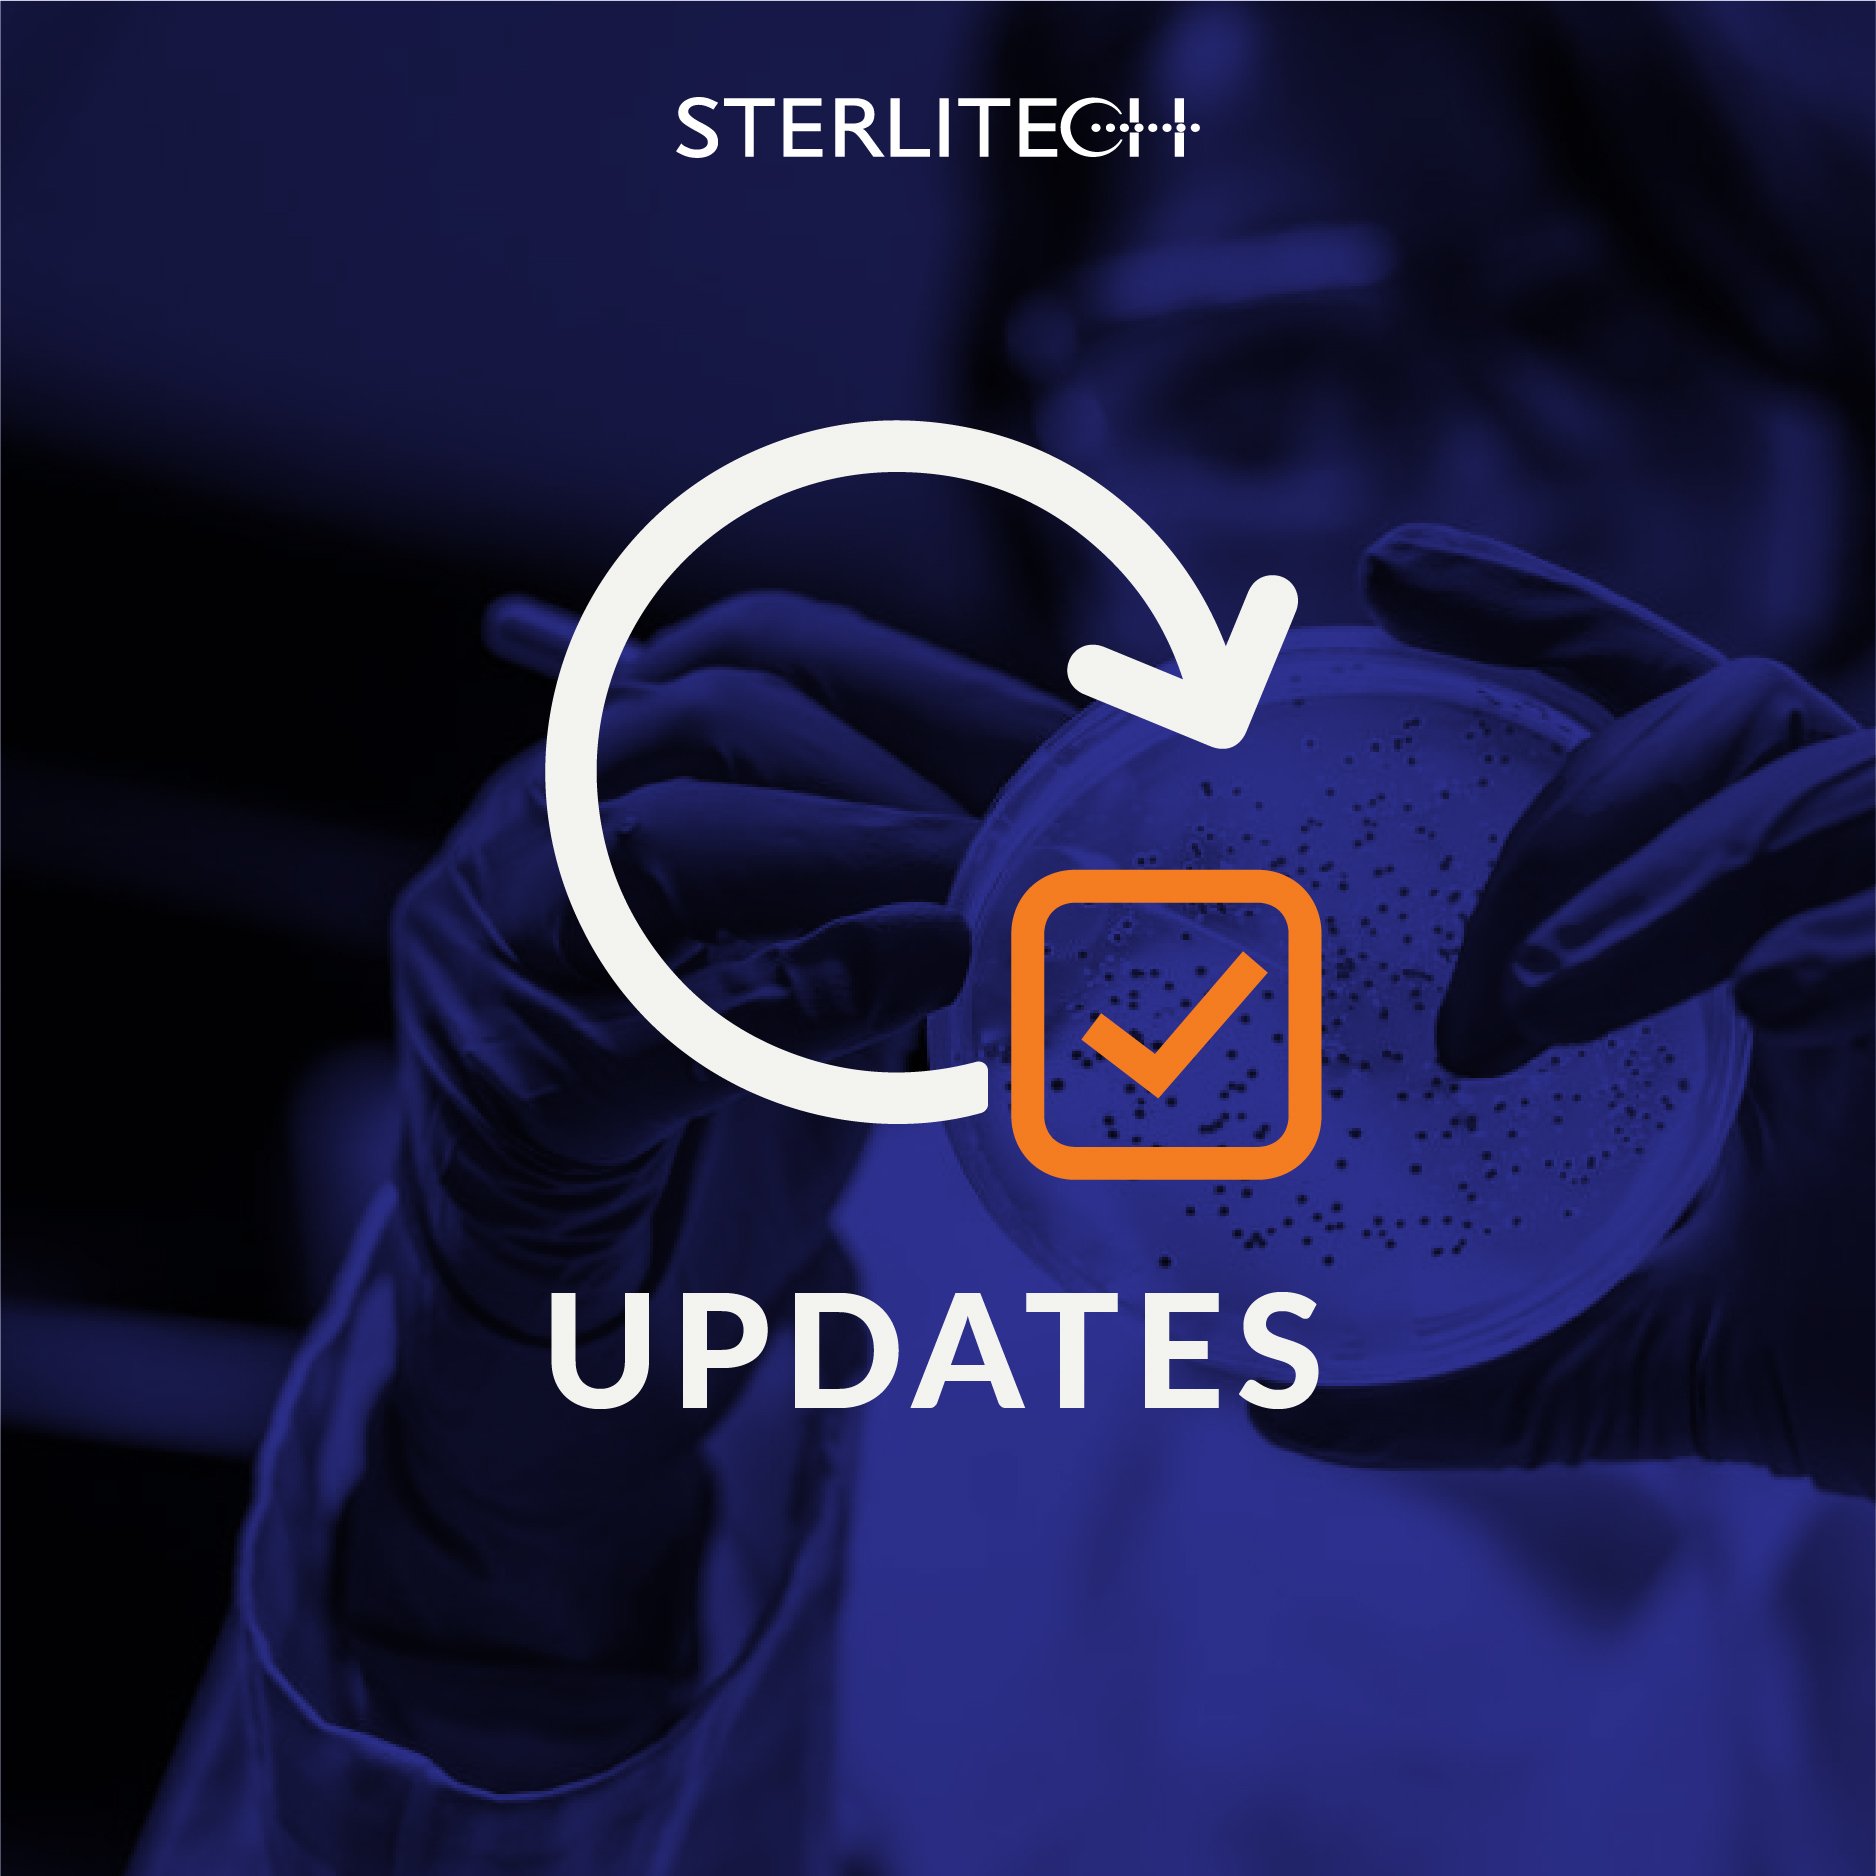 Welcome to the New Sterlitech Blog